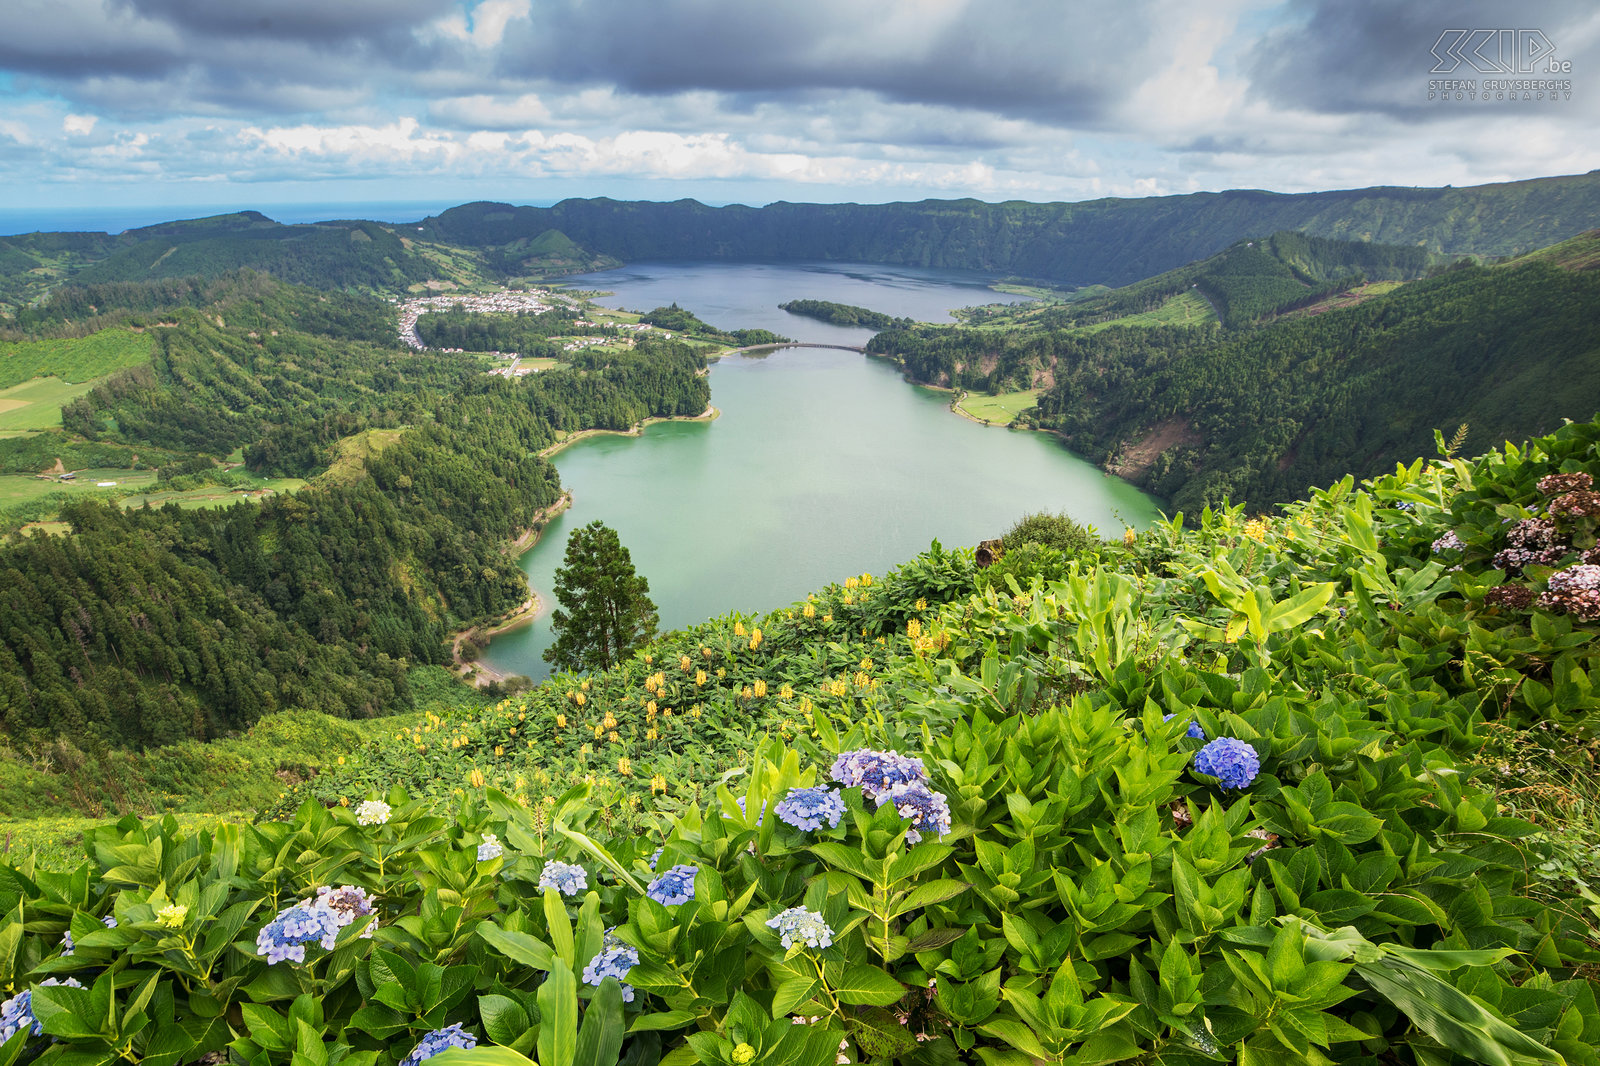 Sete Cidades On the west coast of São Miguel the wonderful crater lakes of Sete Cidades are located. They have a diameter of up to 12 kilometers. The lakes of Sete cidades include the Lagoa Azul (Blue Lake) and the Lagua Verde (Green Lake). Stefan Cruysberghs